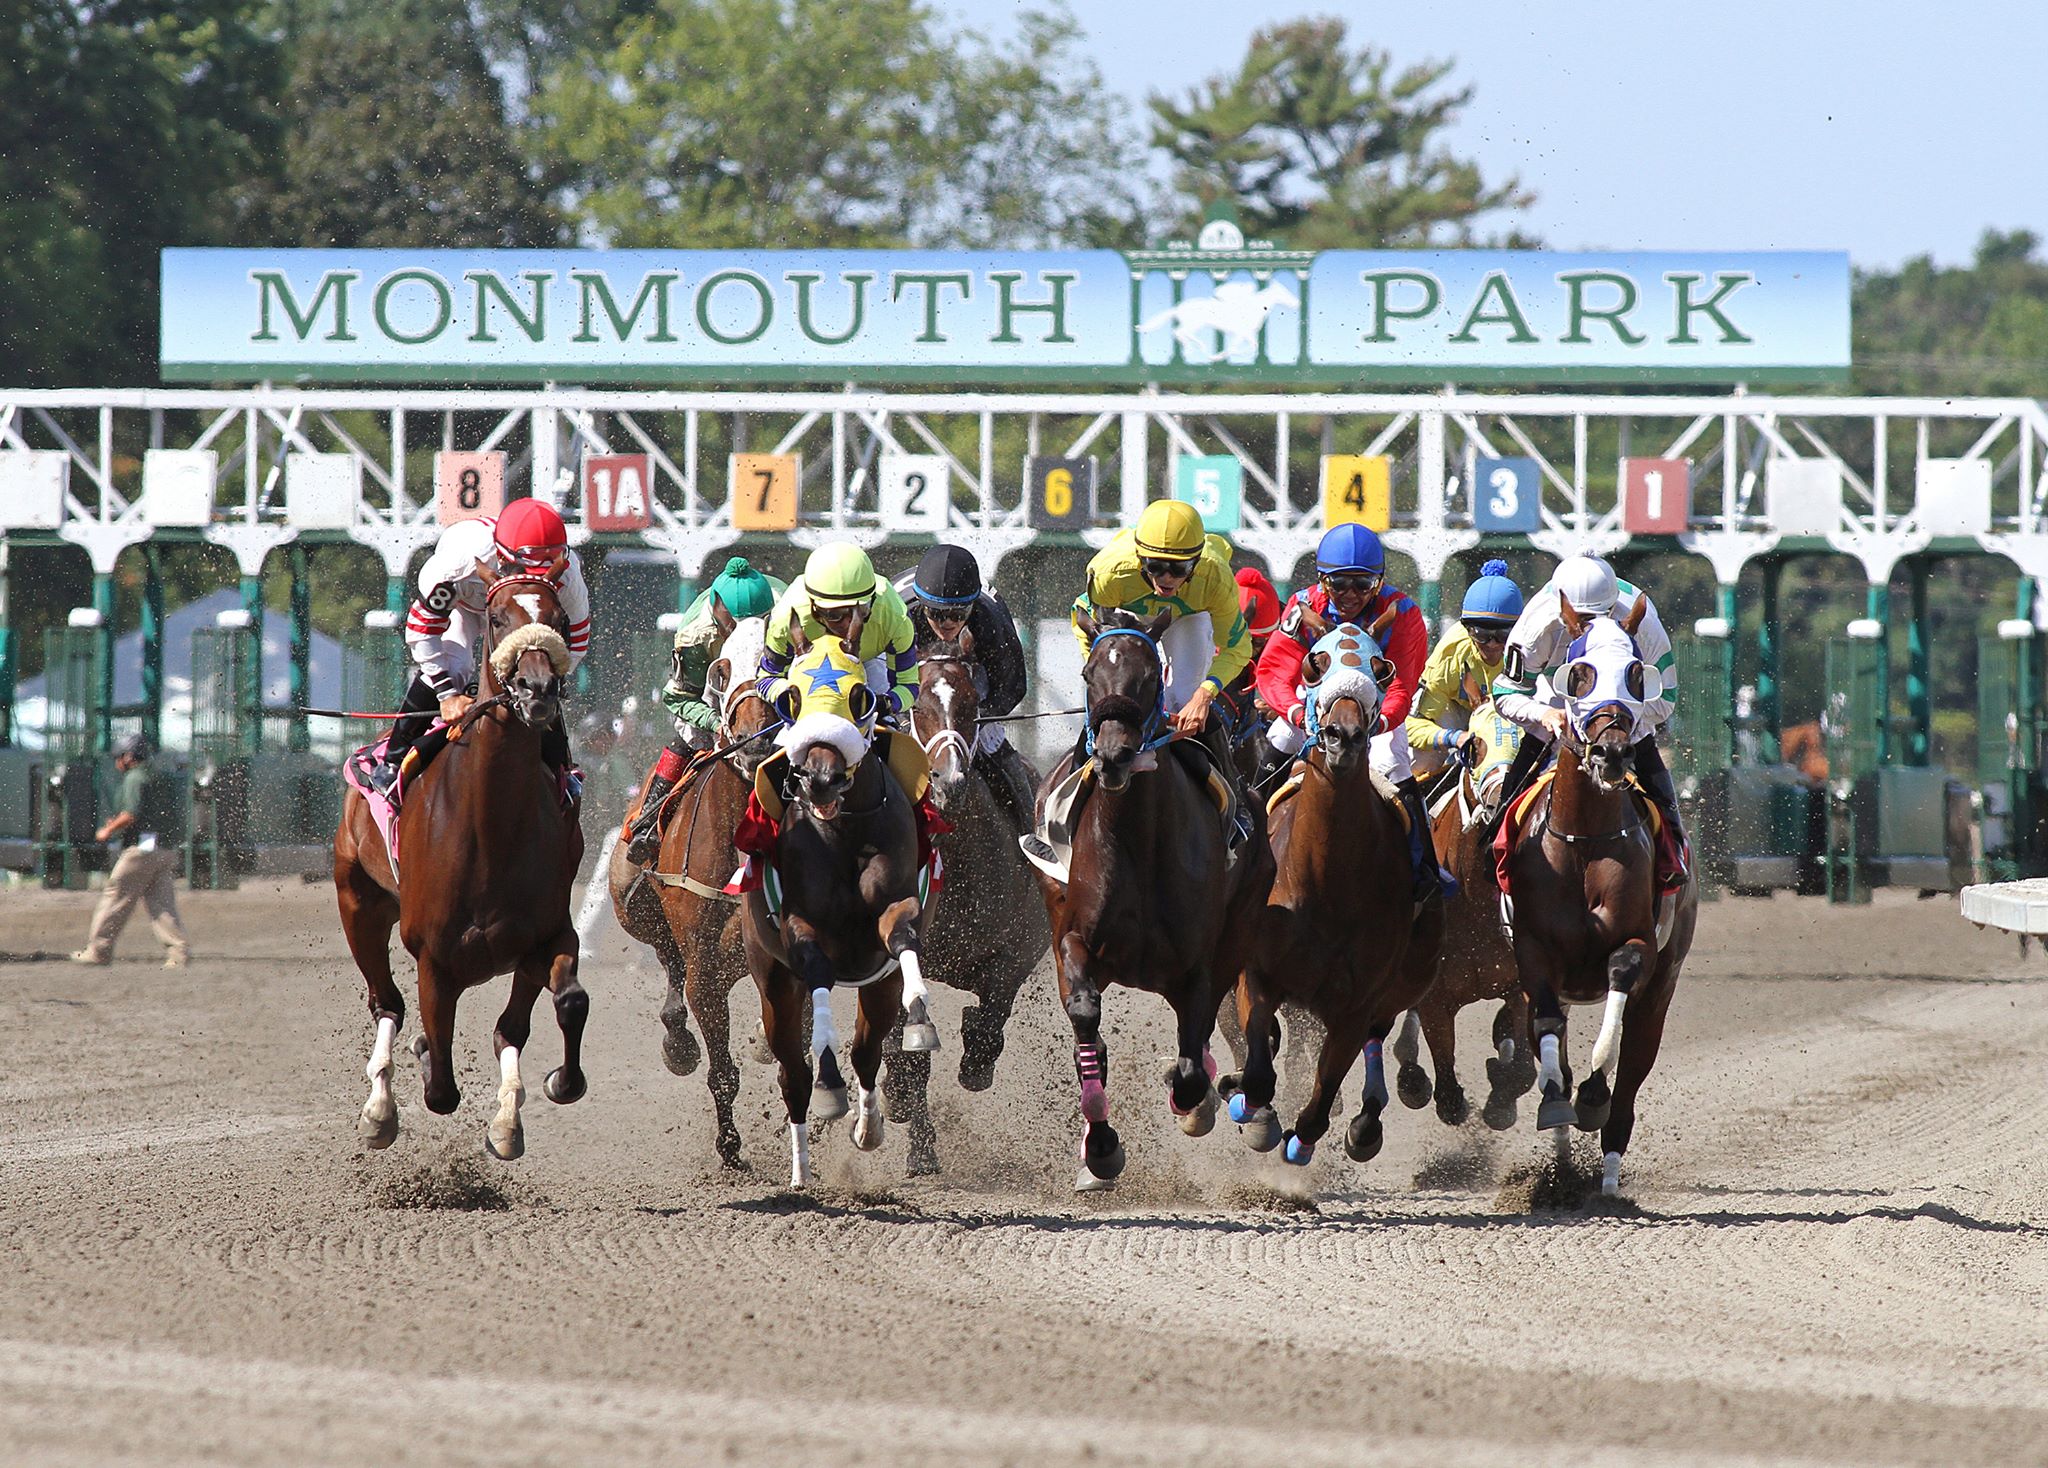 horses and jockeys are seen competing in a race at Monmouth Park in New Jersey, where fixed odds betting will debut this weekend along with the $2 million video board furnished by BetMakers